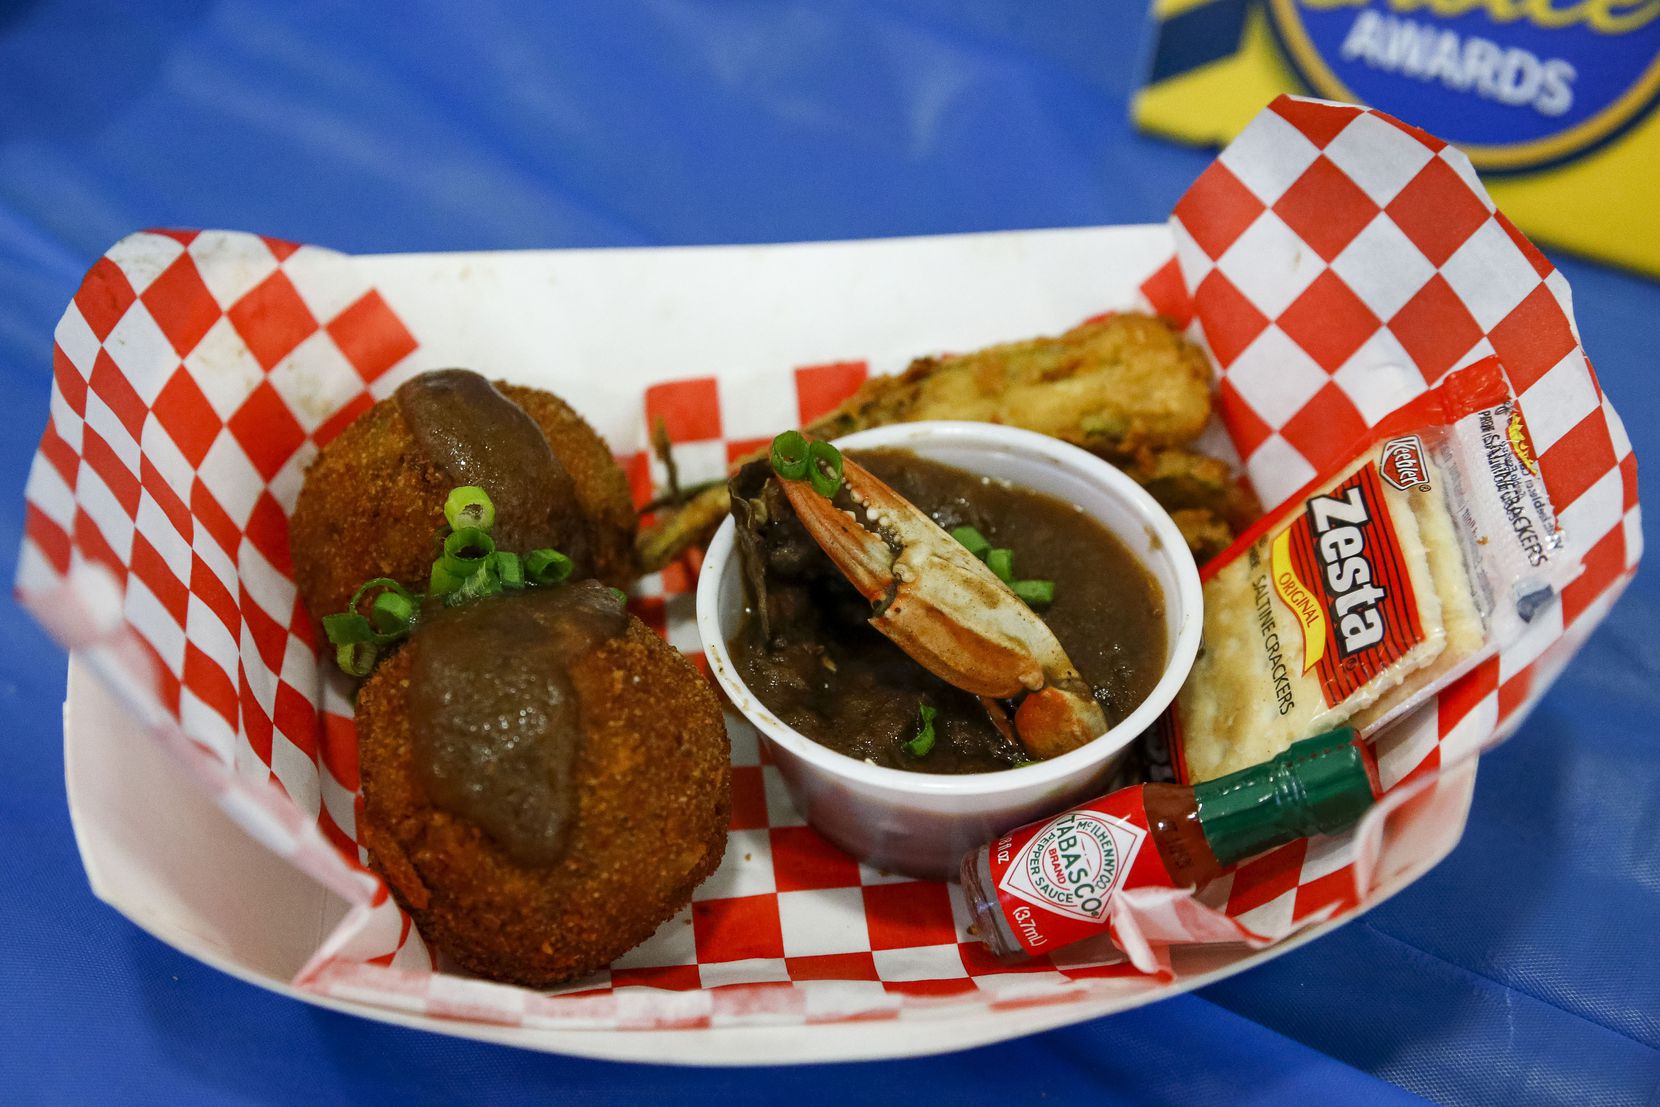 The fried gumbo balls will be sold in two locations at the fair: inside, at the Tower Building; and outside, across from the livestock birthing barn. The State Fair of Texas runs Sept. 24 through Oct. 17, 2021.